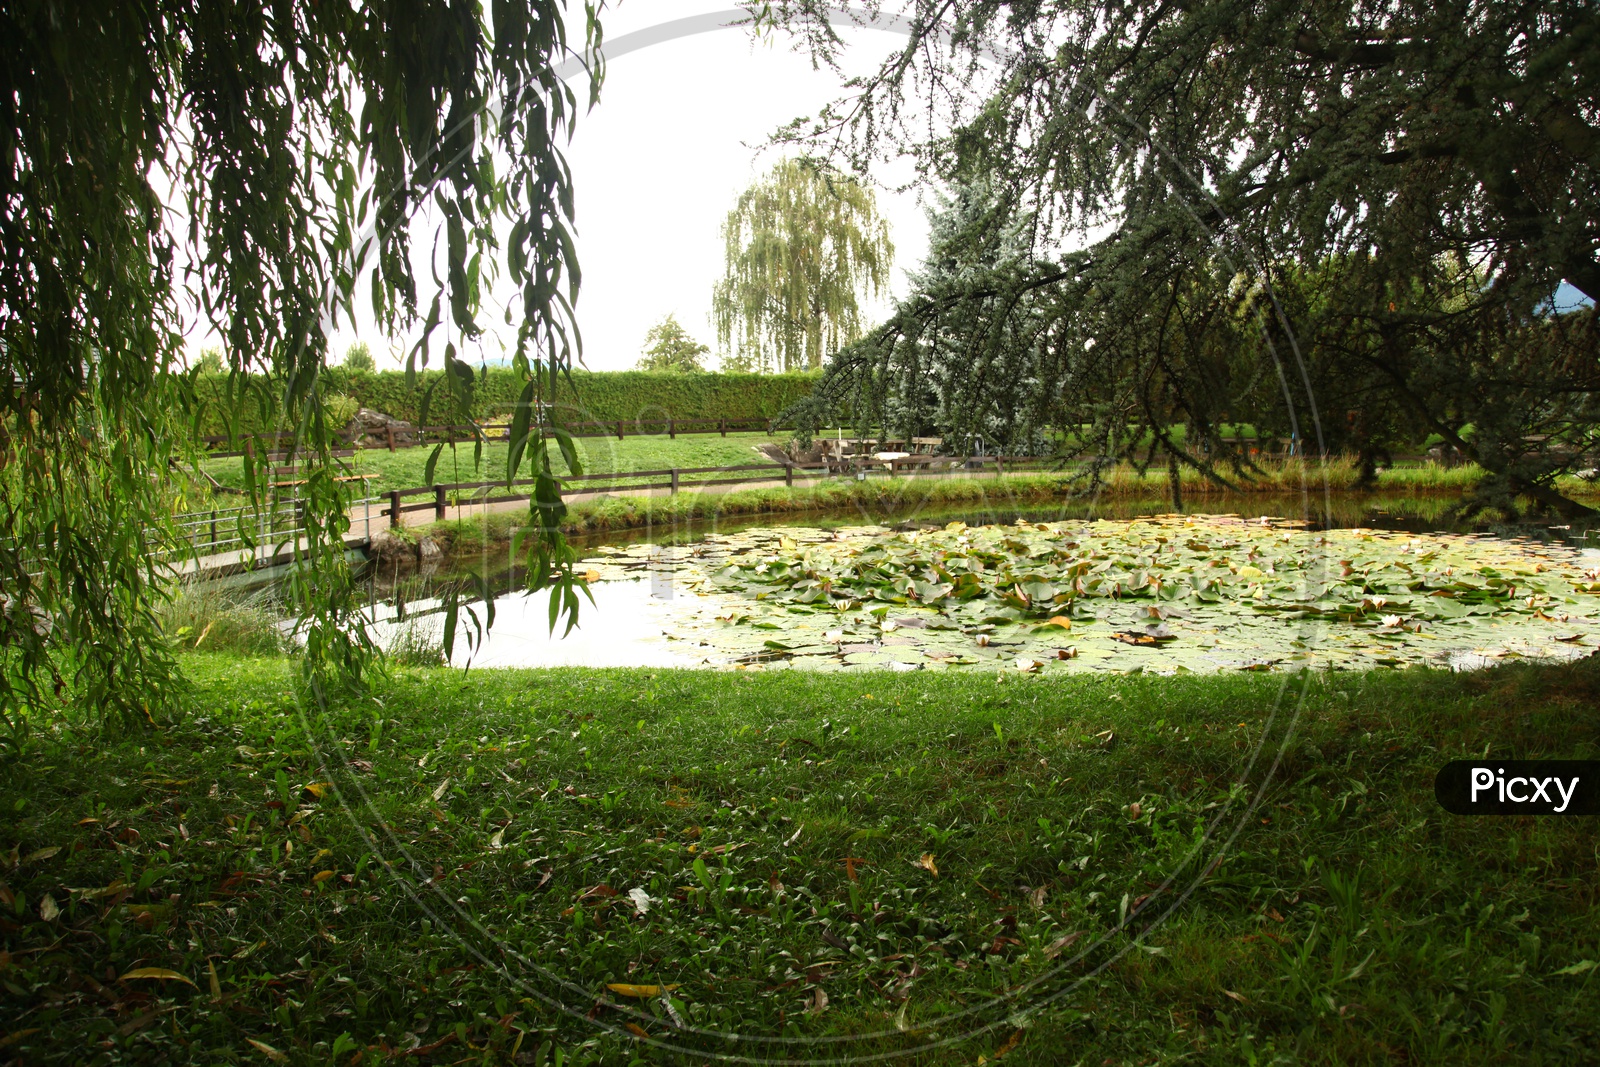 Lotus plants in a pond